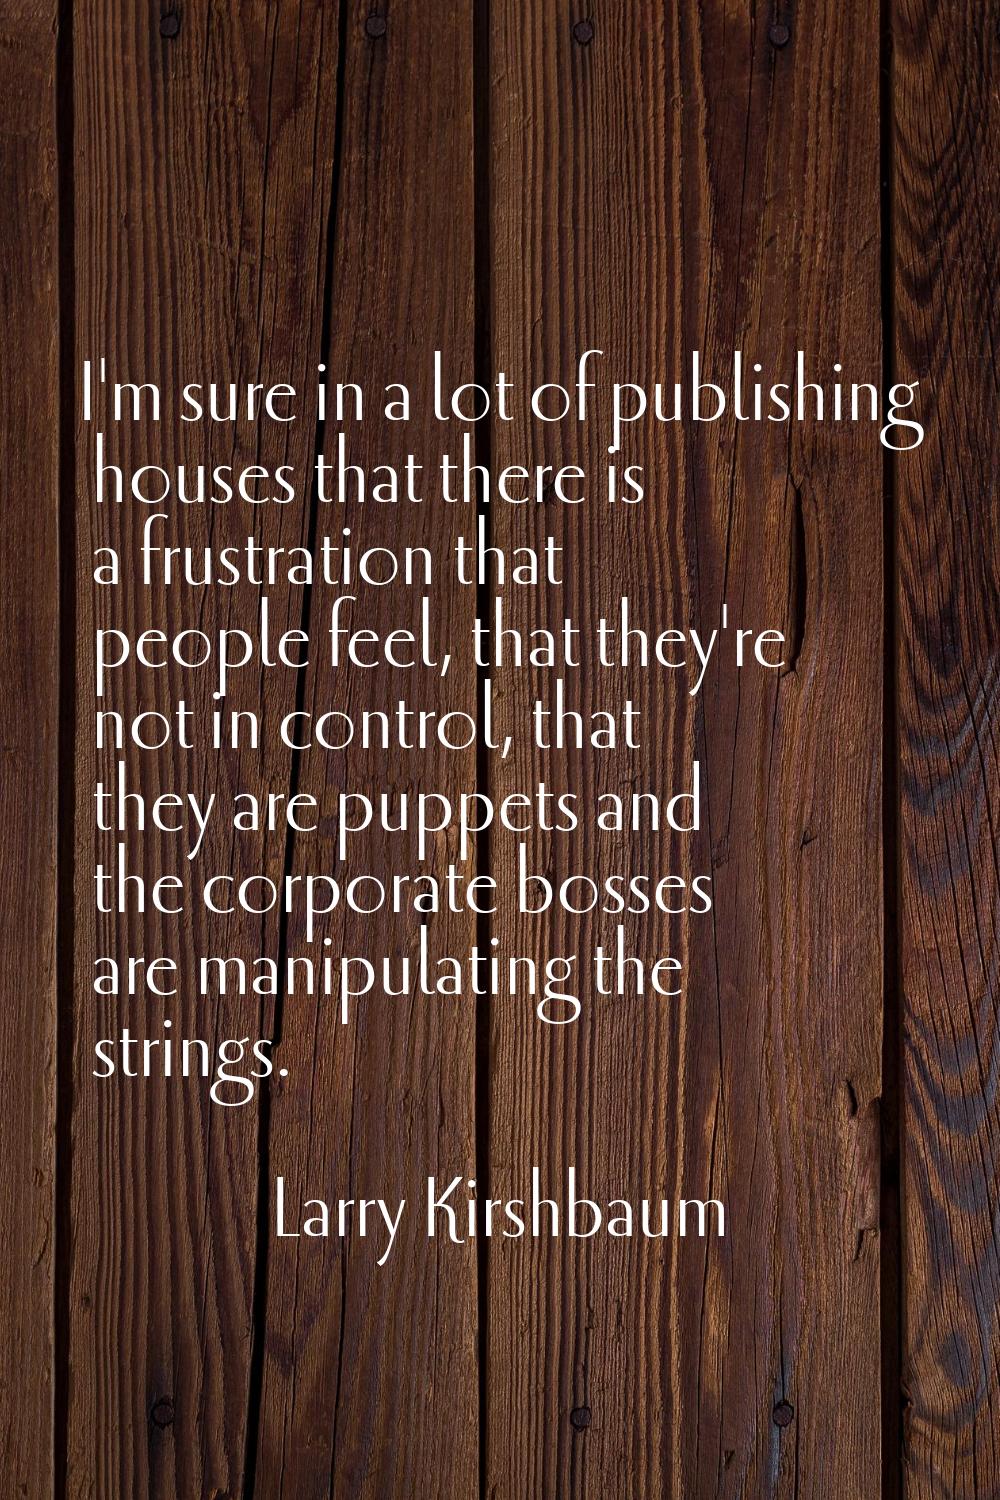 I'm sure in a lot of publishing houses that there is a frustration that people feel, that they're n